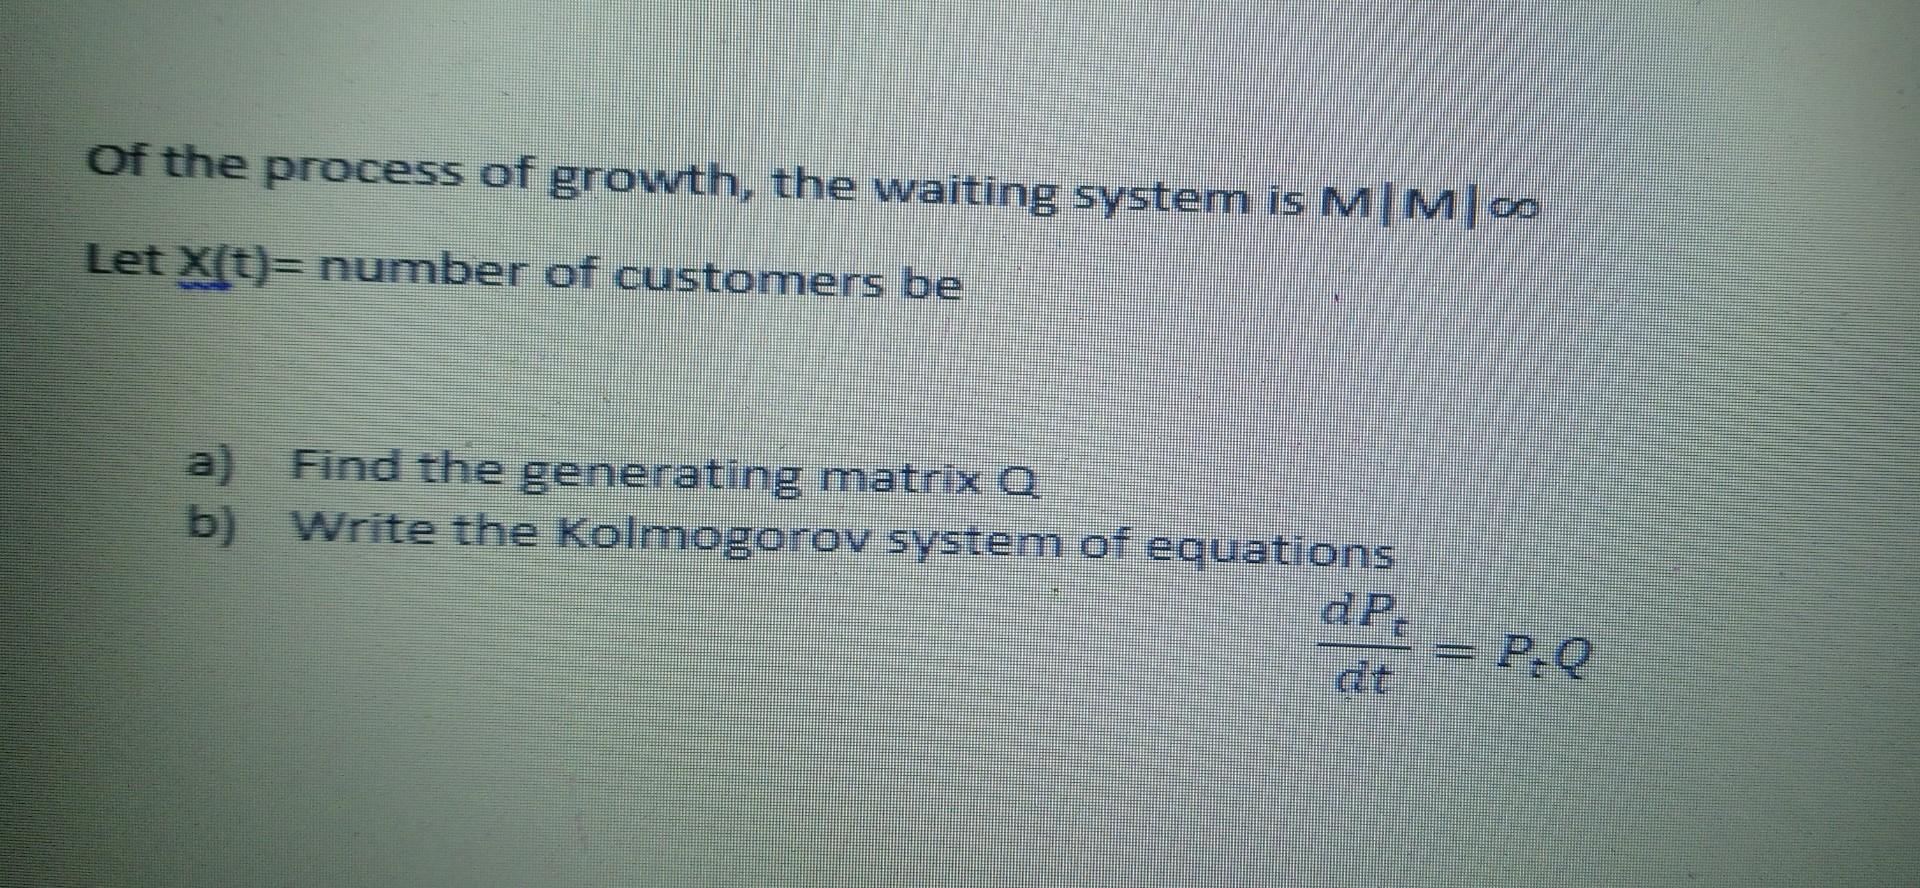 of the process of growth, the waiting system is M|M|co Let X(t)= number of customers be a Find the generating matrix Q b) Wri